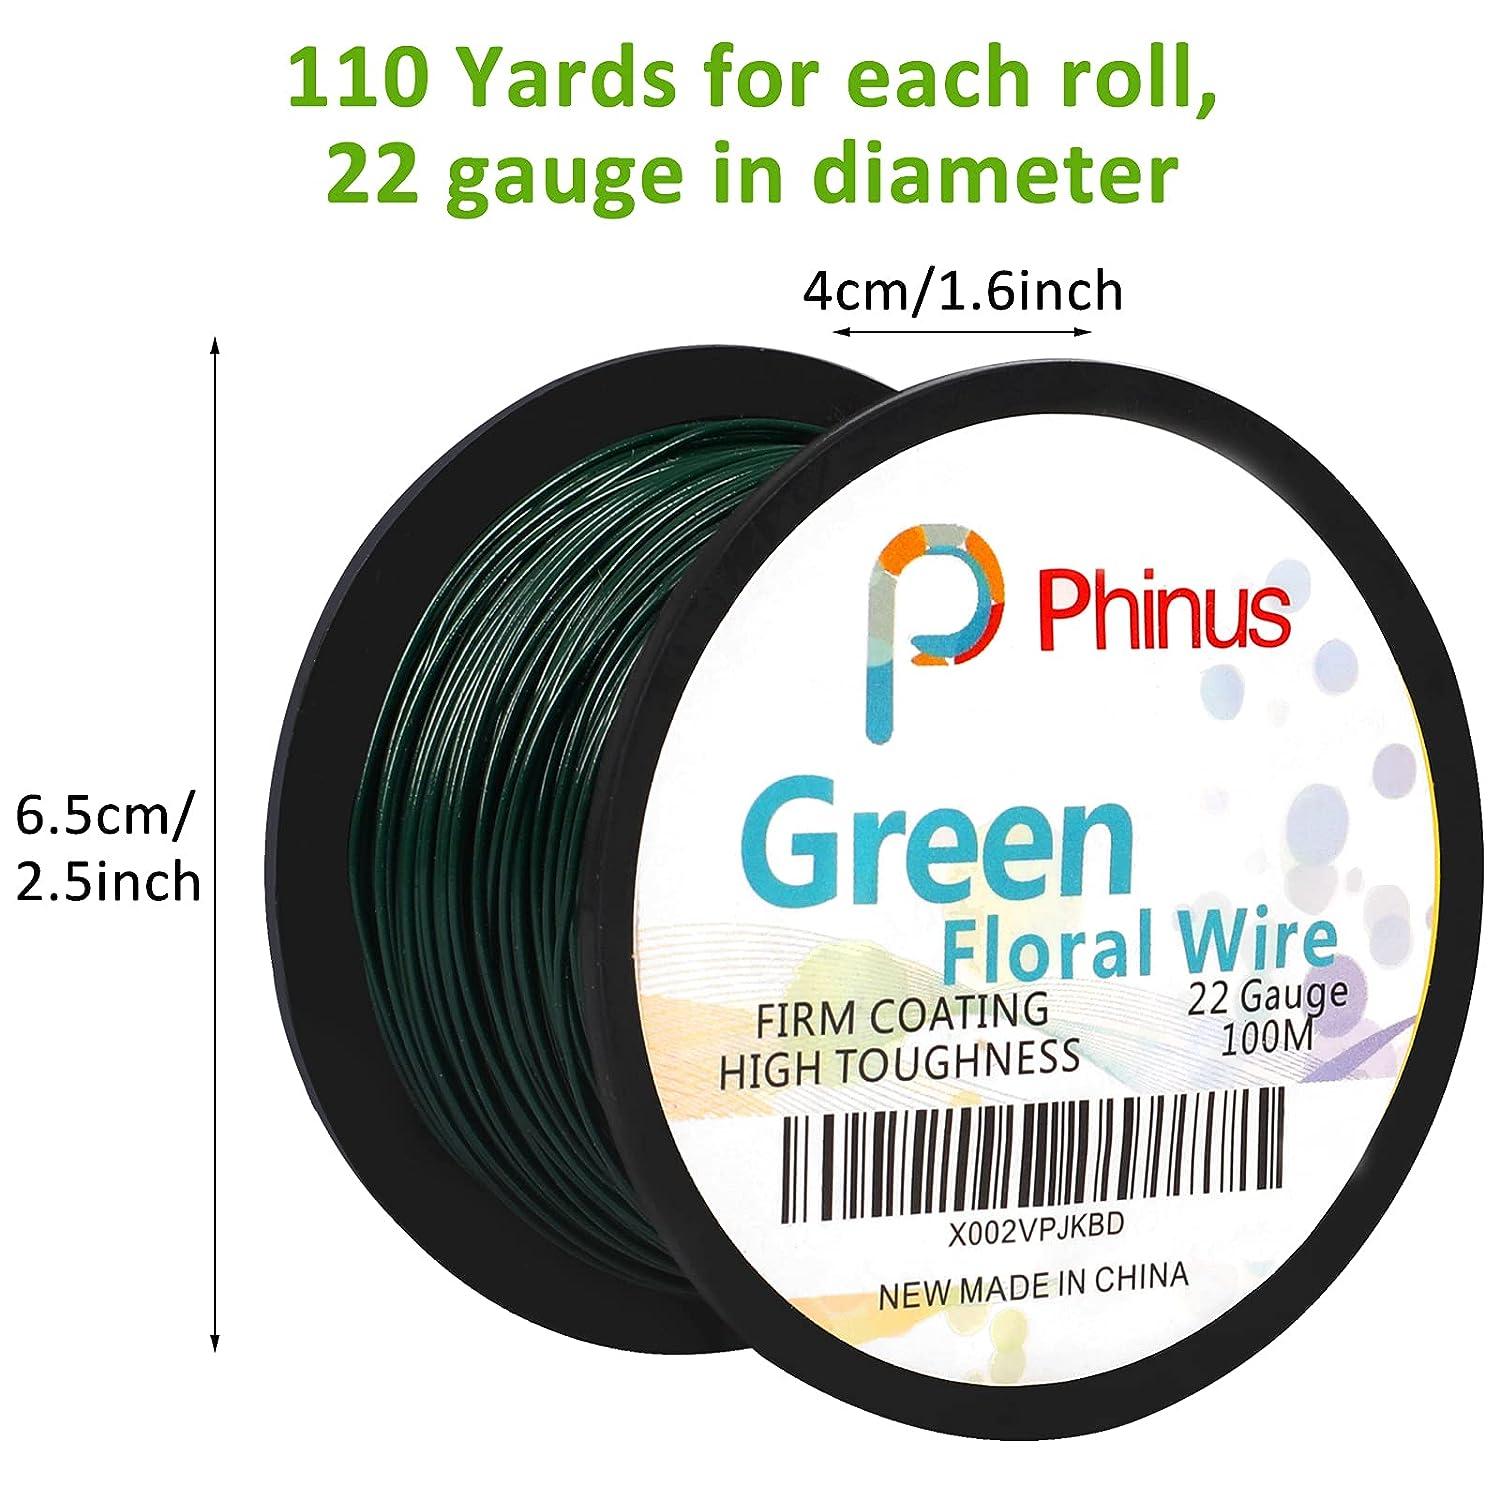 22 Gauge Floral Wire Flexible Paddle Wire Florist Green Wire with